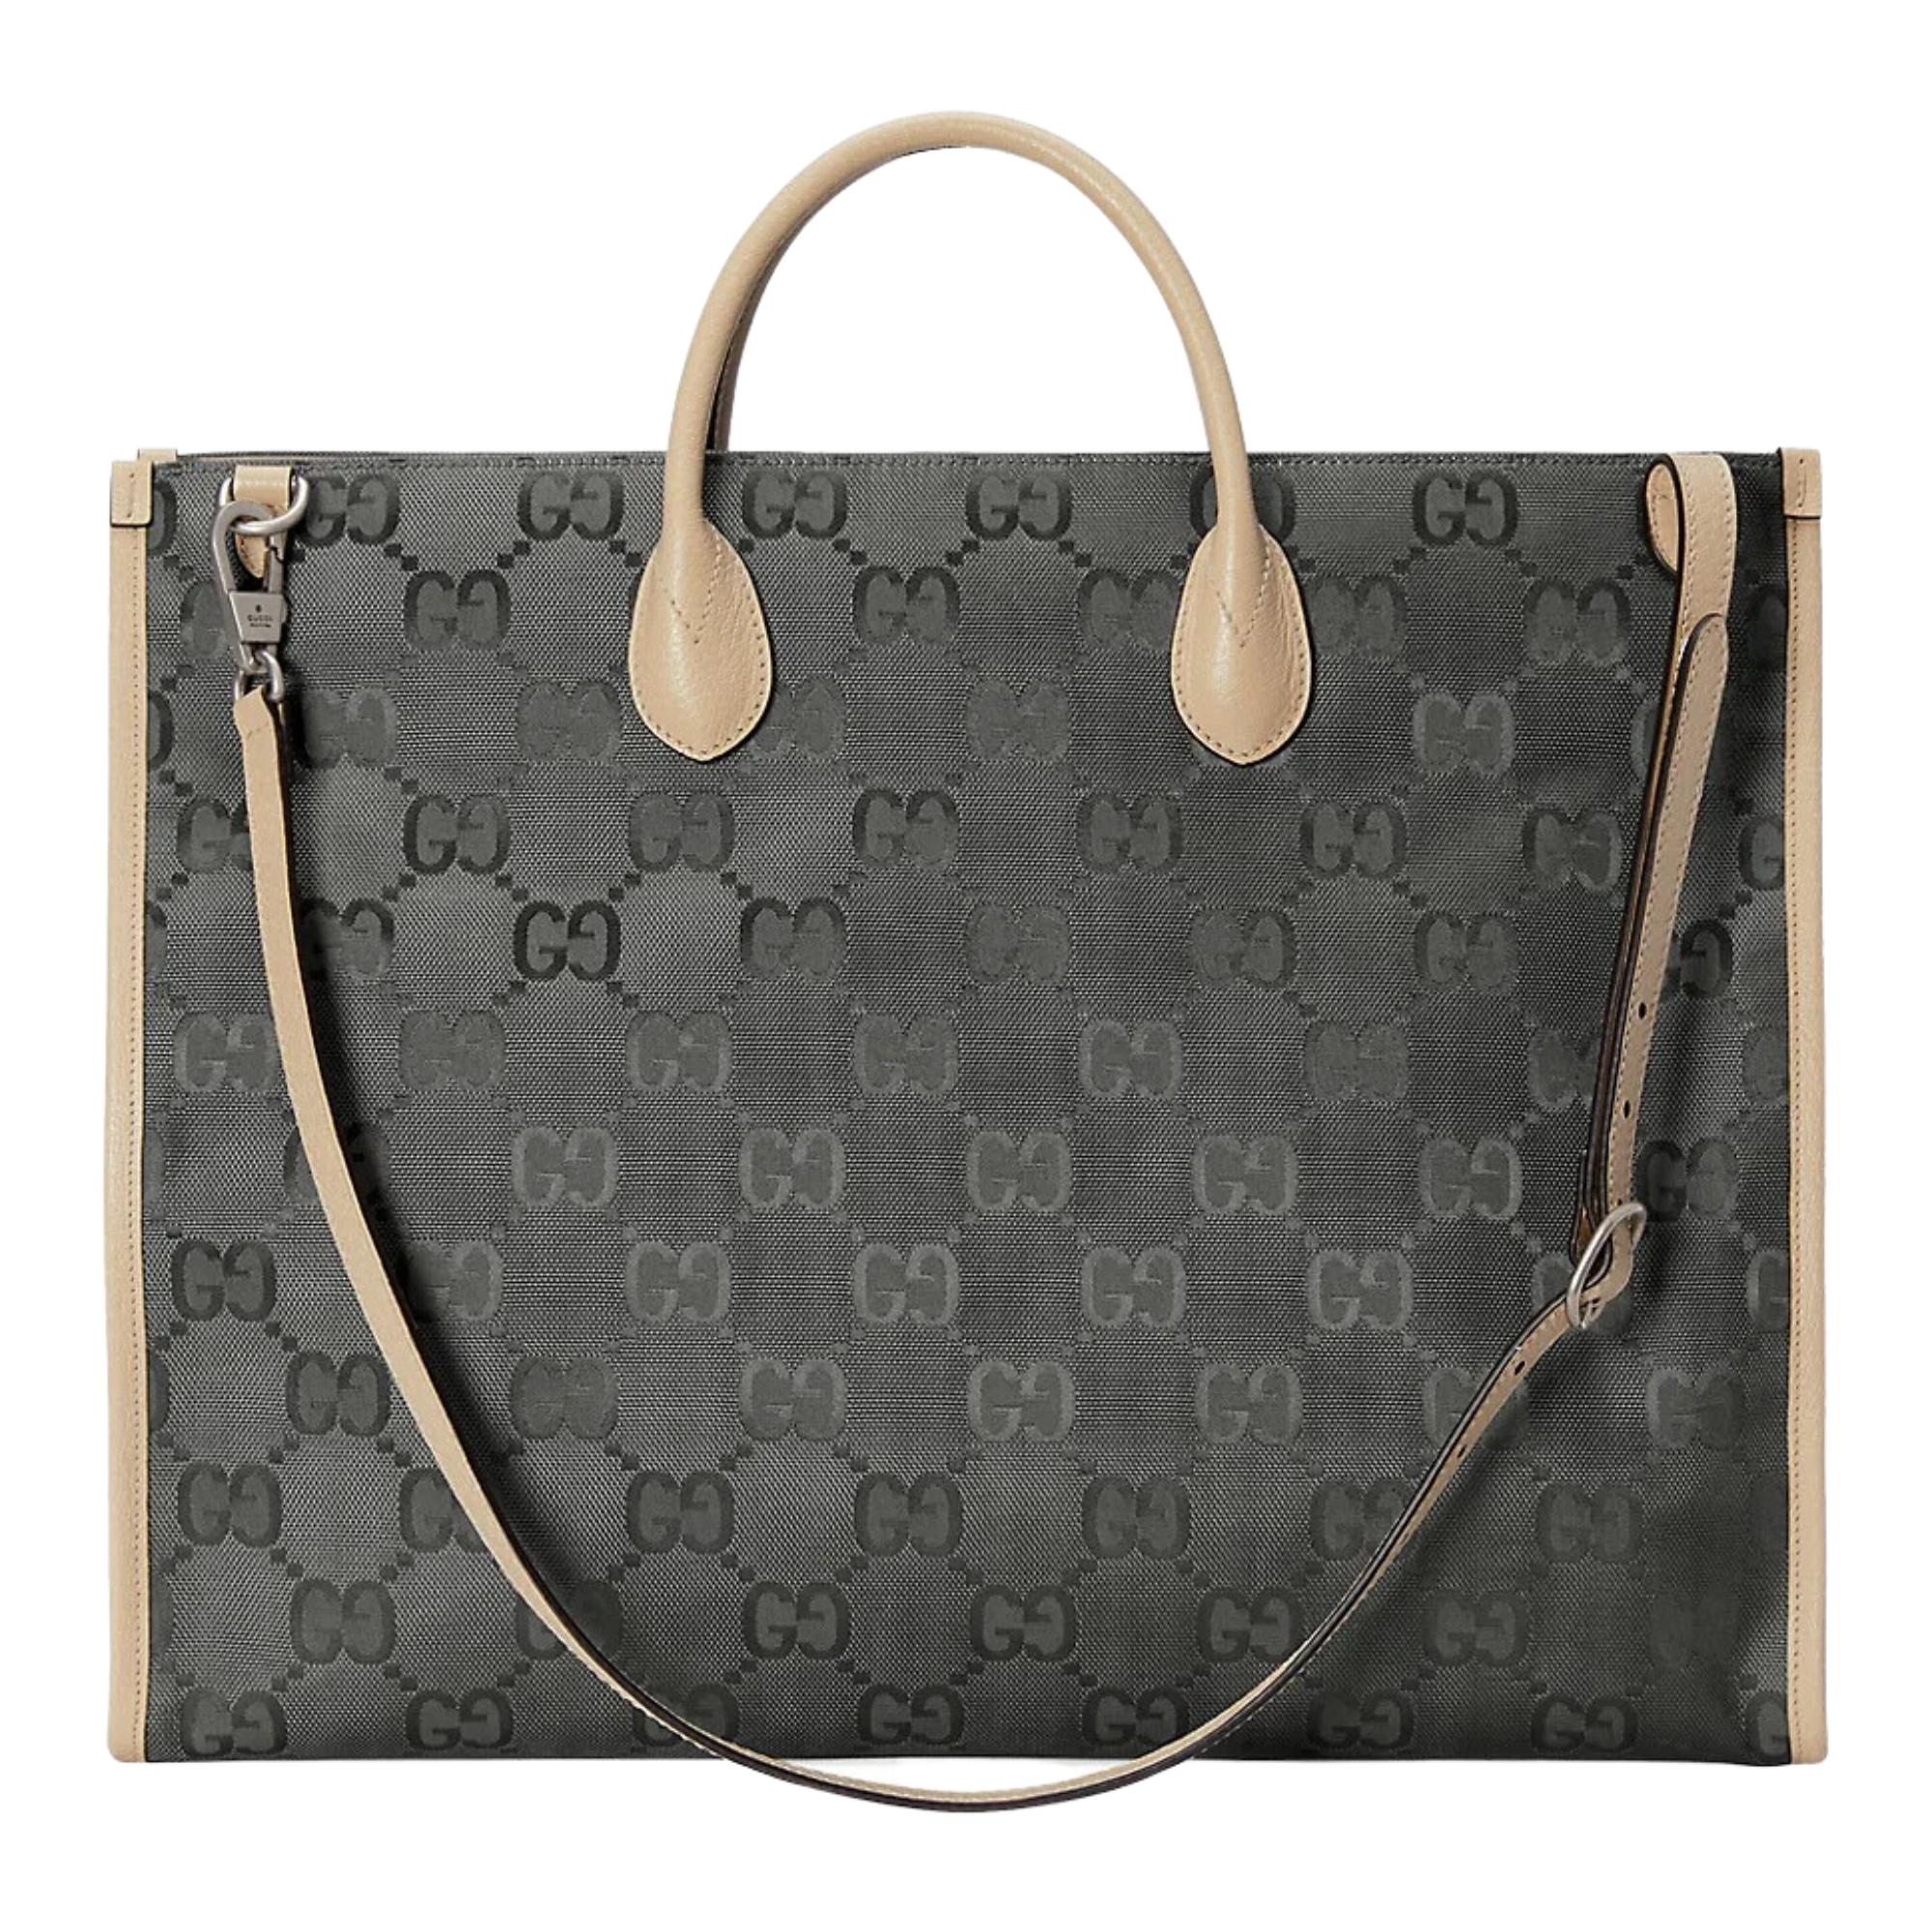 GUCCI NYLON GREY MONOGRAM OFF THE GRID TOTE BAG LARGE

This Gucci tote is part of the brand's Off The Grid line collection that uses organic and sustainably sourced materials. The collection is made of Econyl® nylon, a fabric sourced from